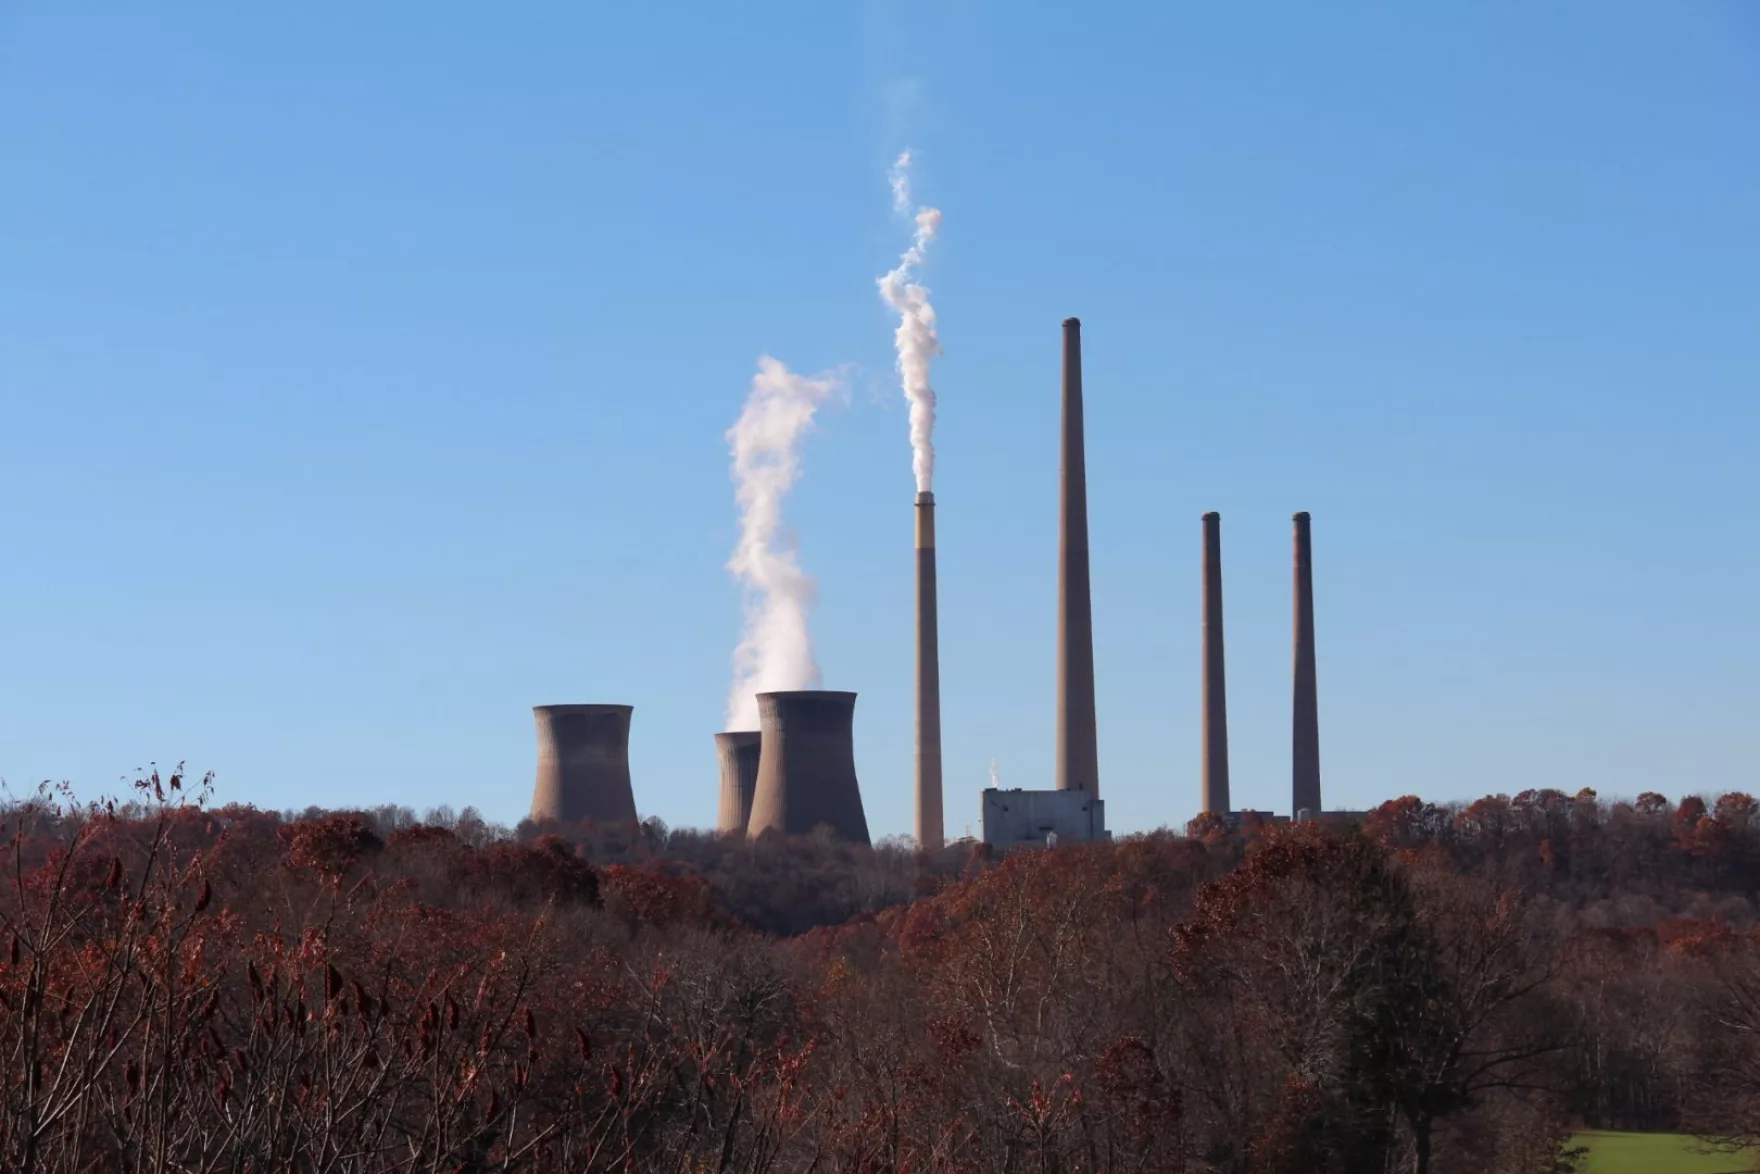 A power plant, with cooling towers and smokestacks, is visible from a distance on a clear winter day.